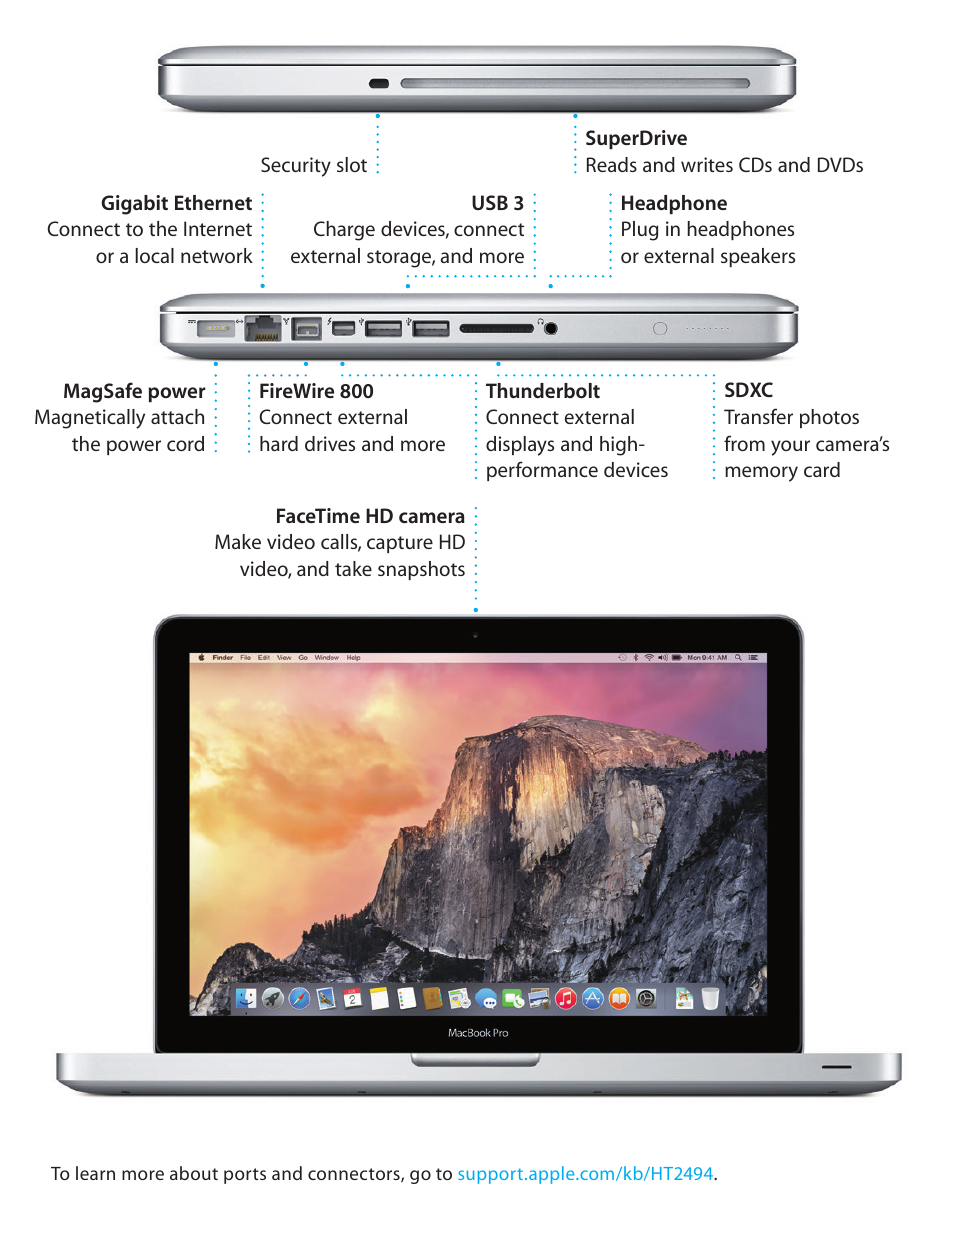 Apple MacBook Pro (13-inch, Mid 2012) User Manual | Page 3 / 20